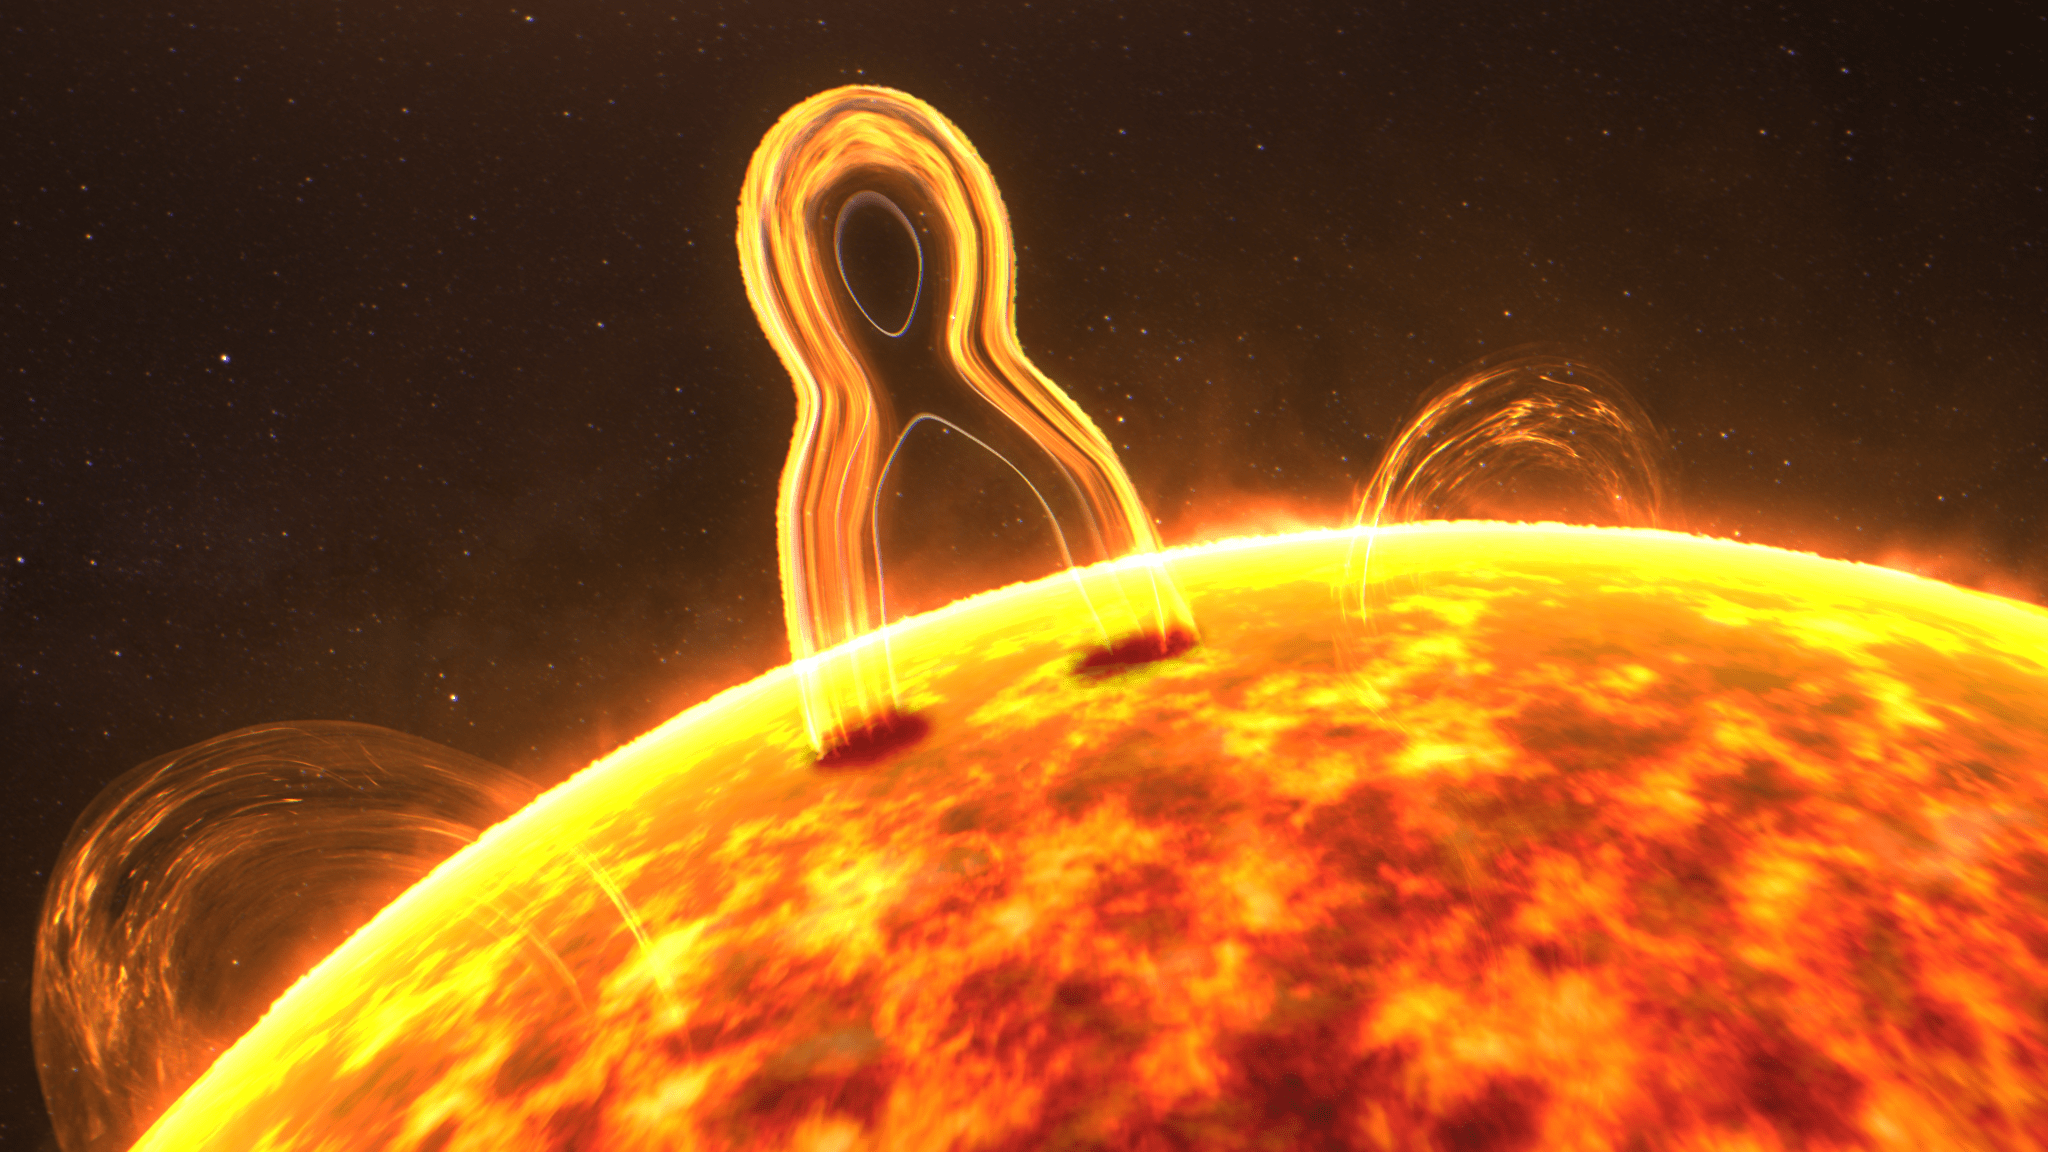 An illustration shows the edge of the Sun. Above it rises a figure-eight shaped prominence, where the center is pinched inward.